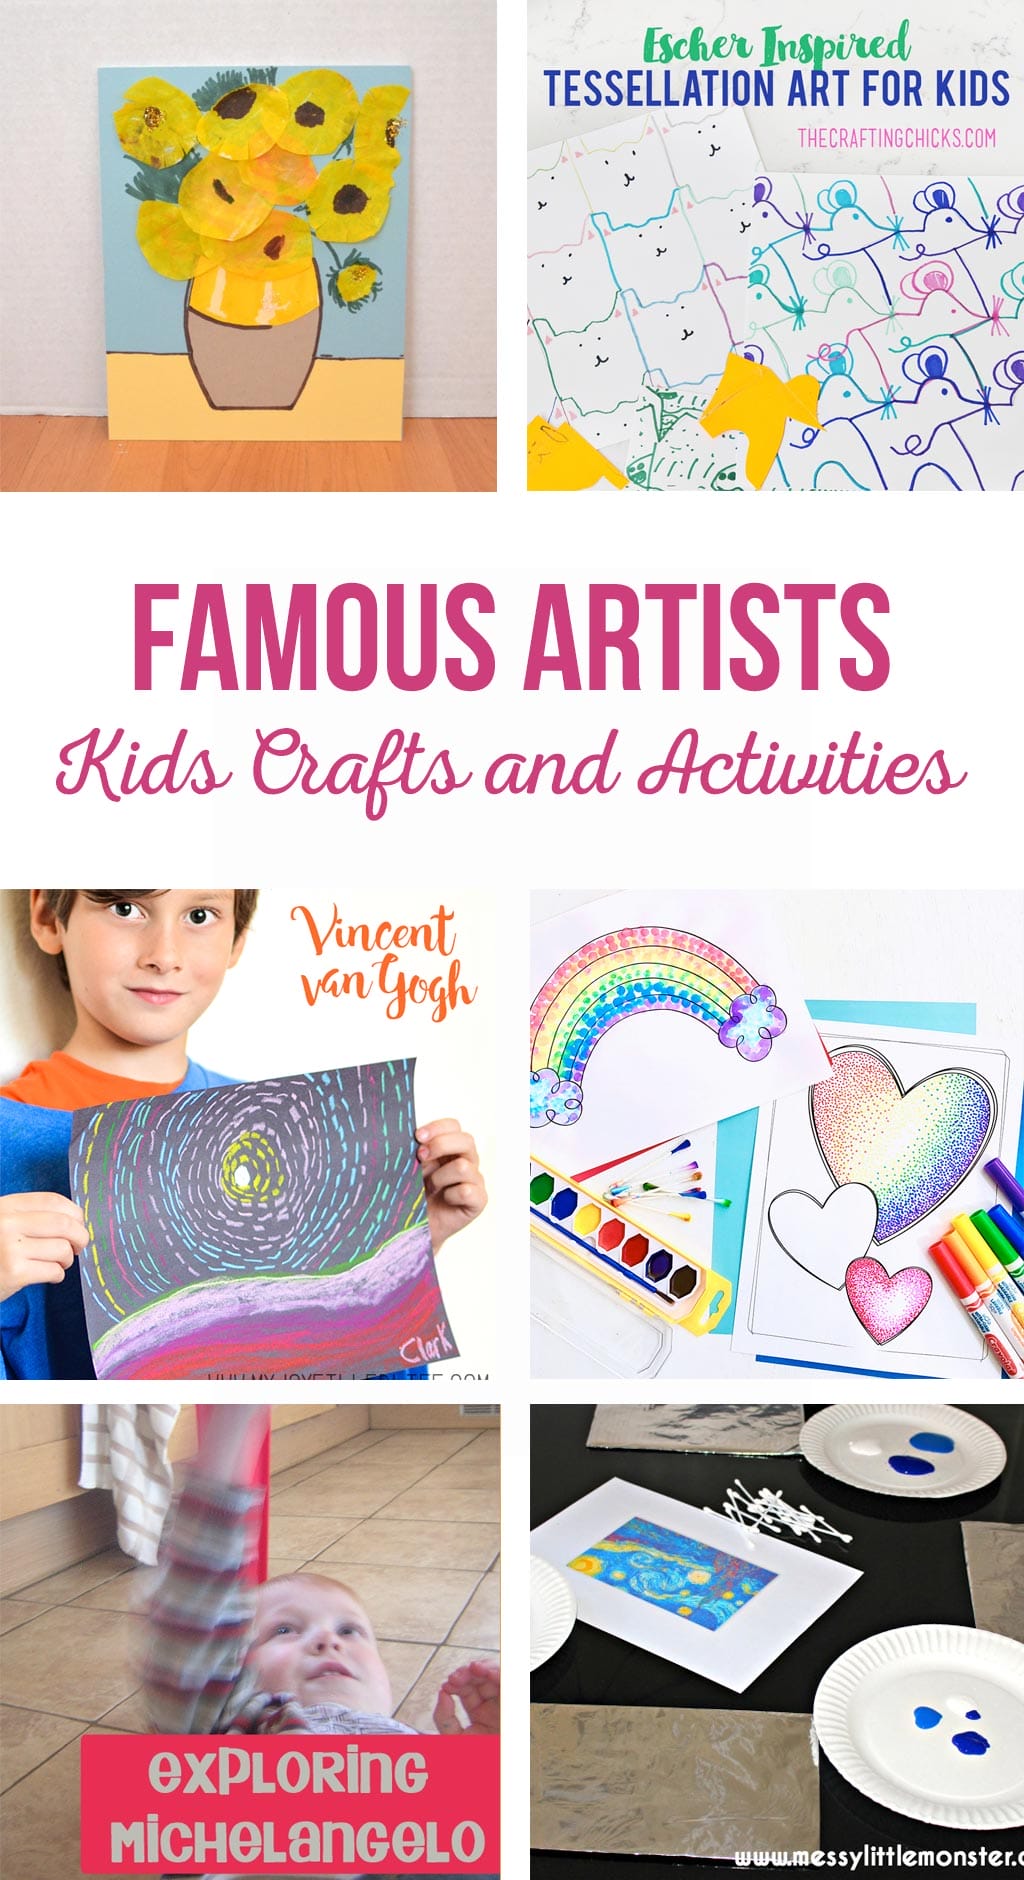 Famous Artists Kids Crafts and Activities | Teach kids about famous artists through fun activities, easy crafts and art projects.